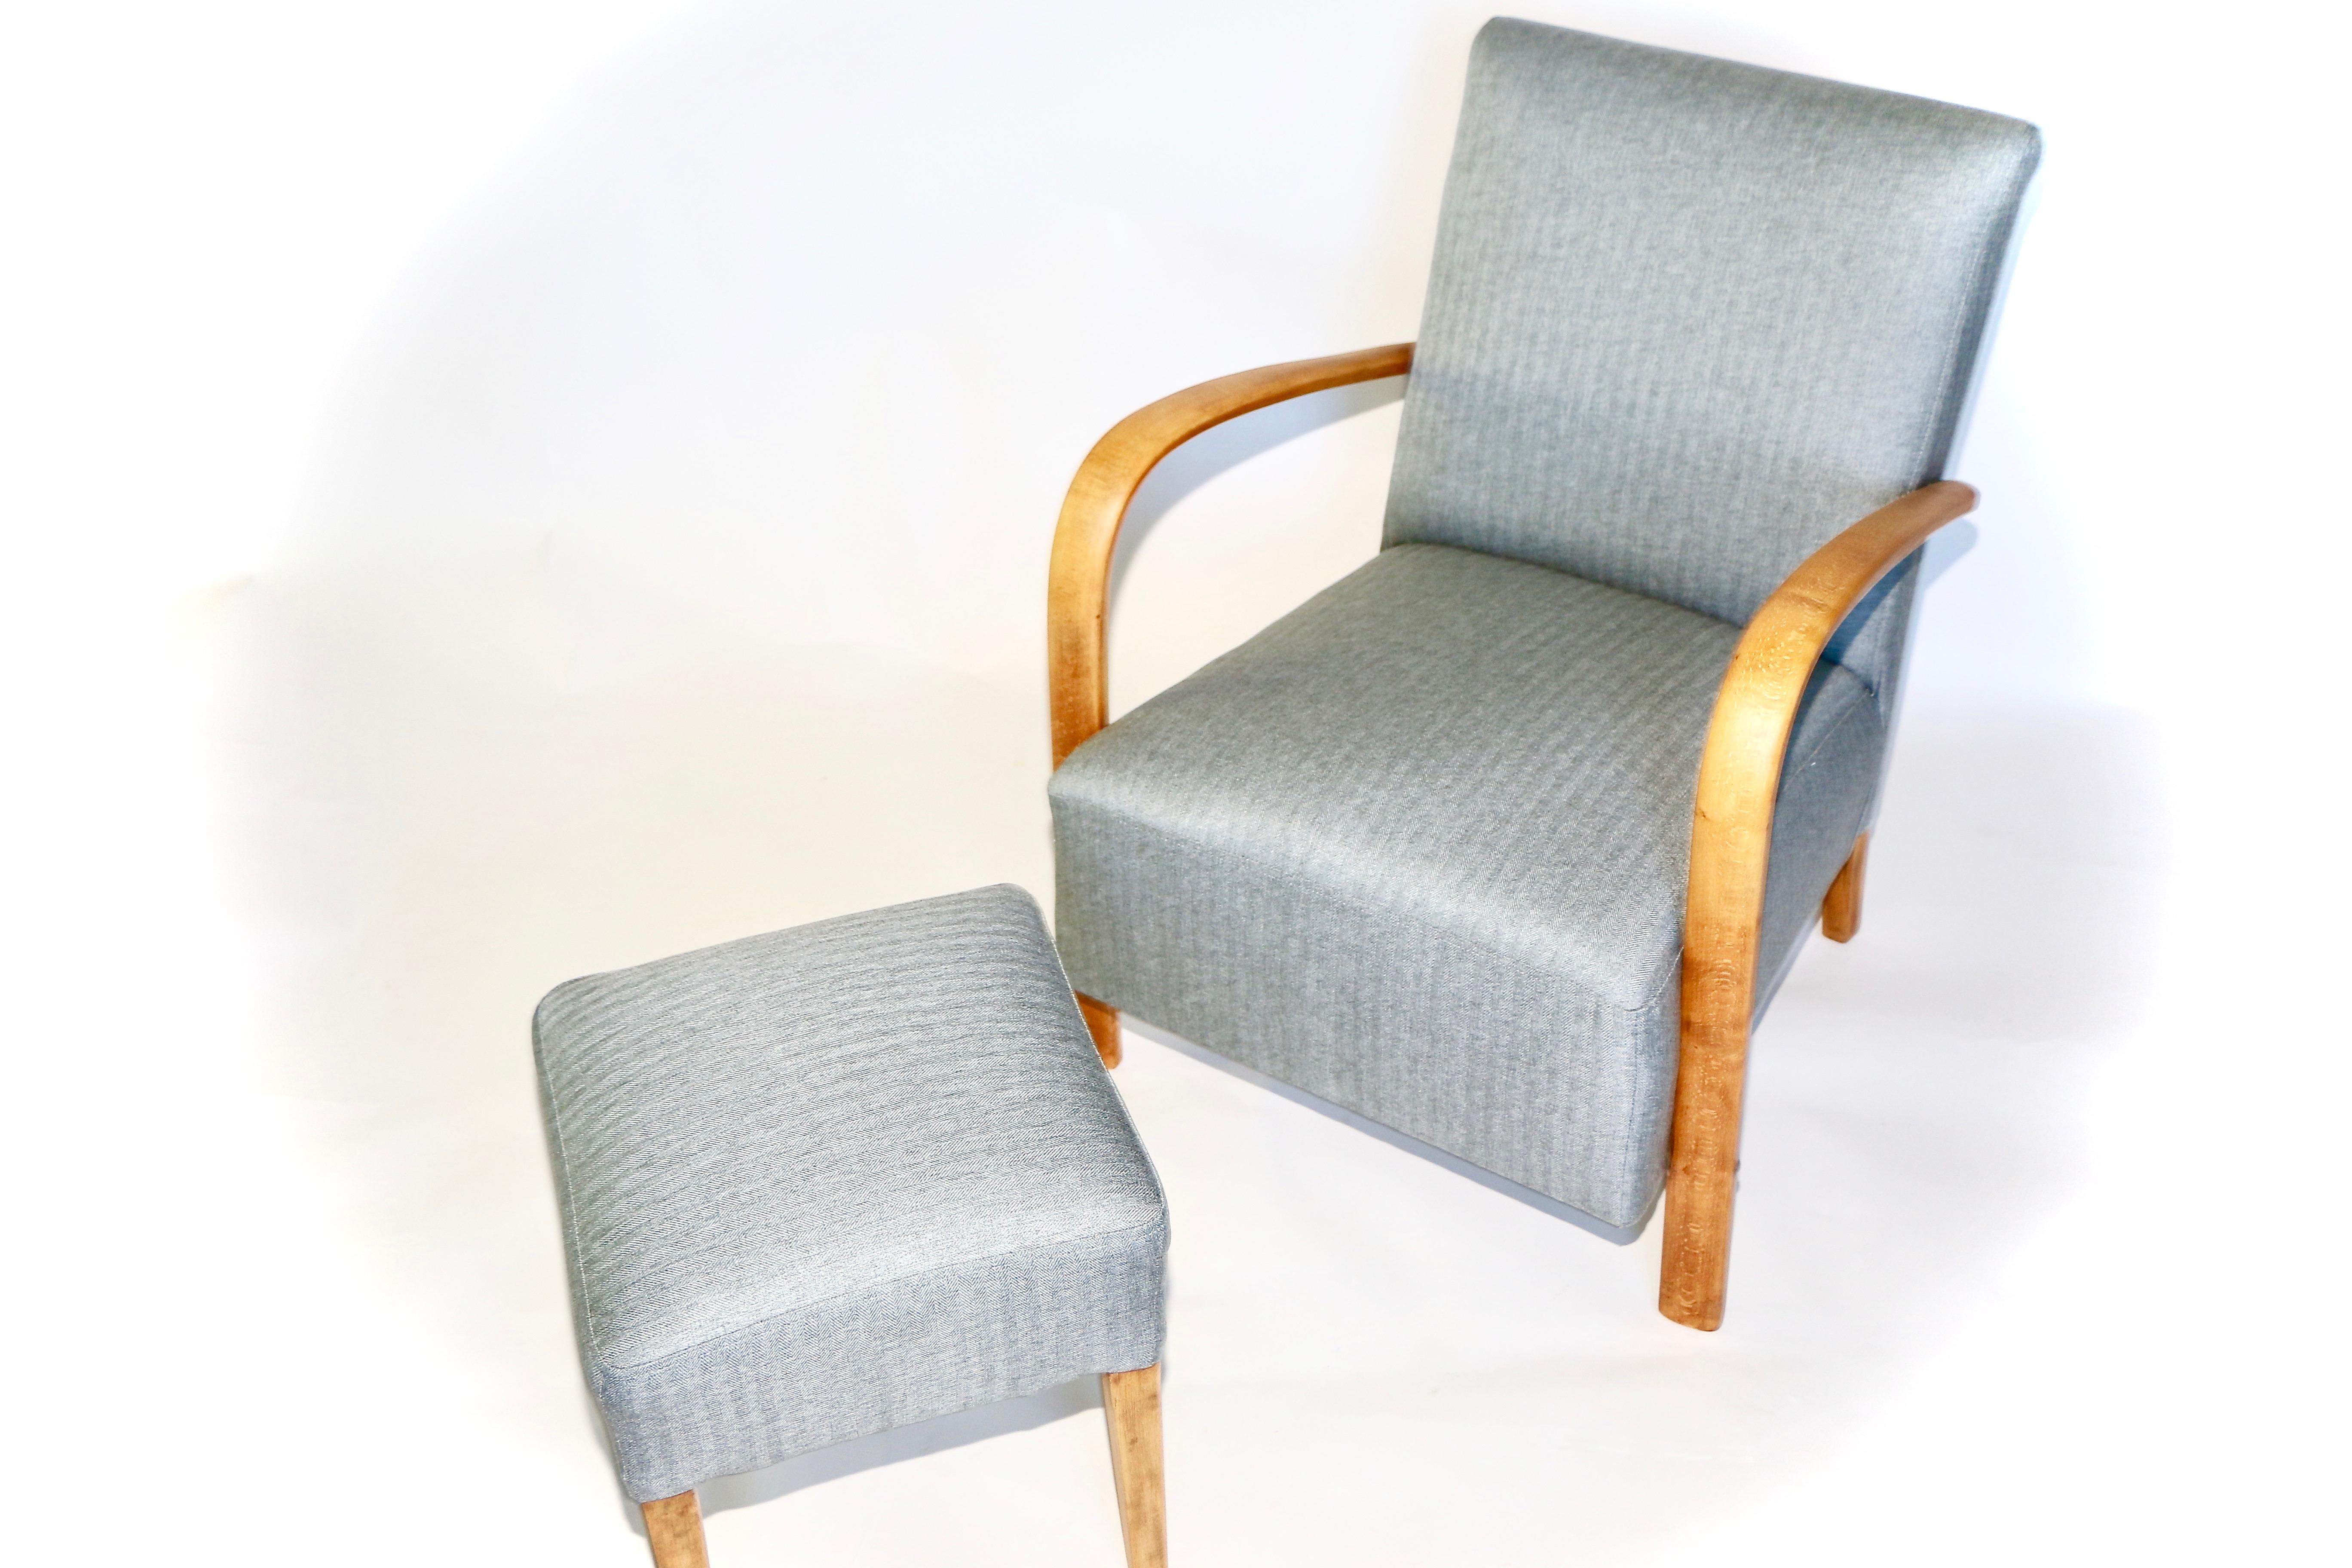 Restored Art Deco armchair with footrest seat in gray from 1960s, new upholstery covered with herringbone fabric in fashionable gray color, finished with wooden chair cushion. Wooden elements in antic wood color and beech tree. Very good